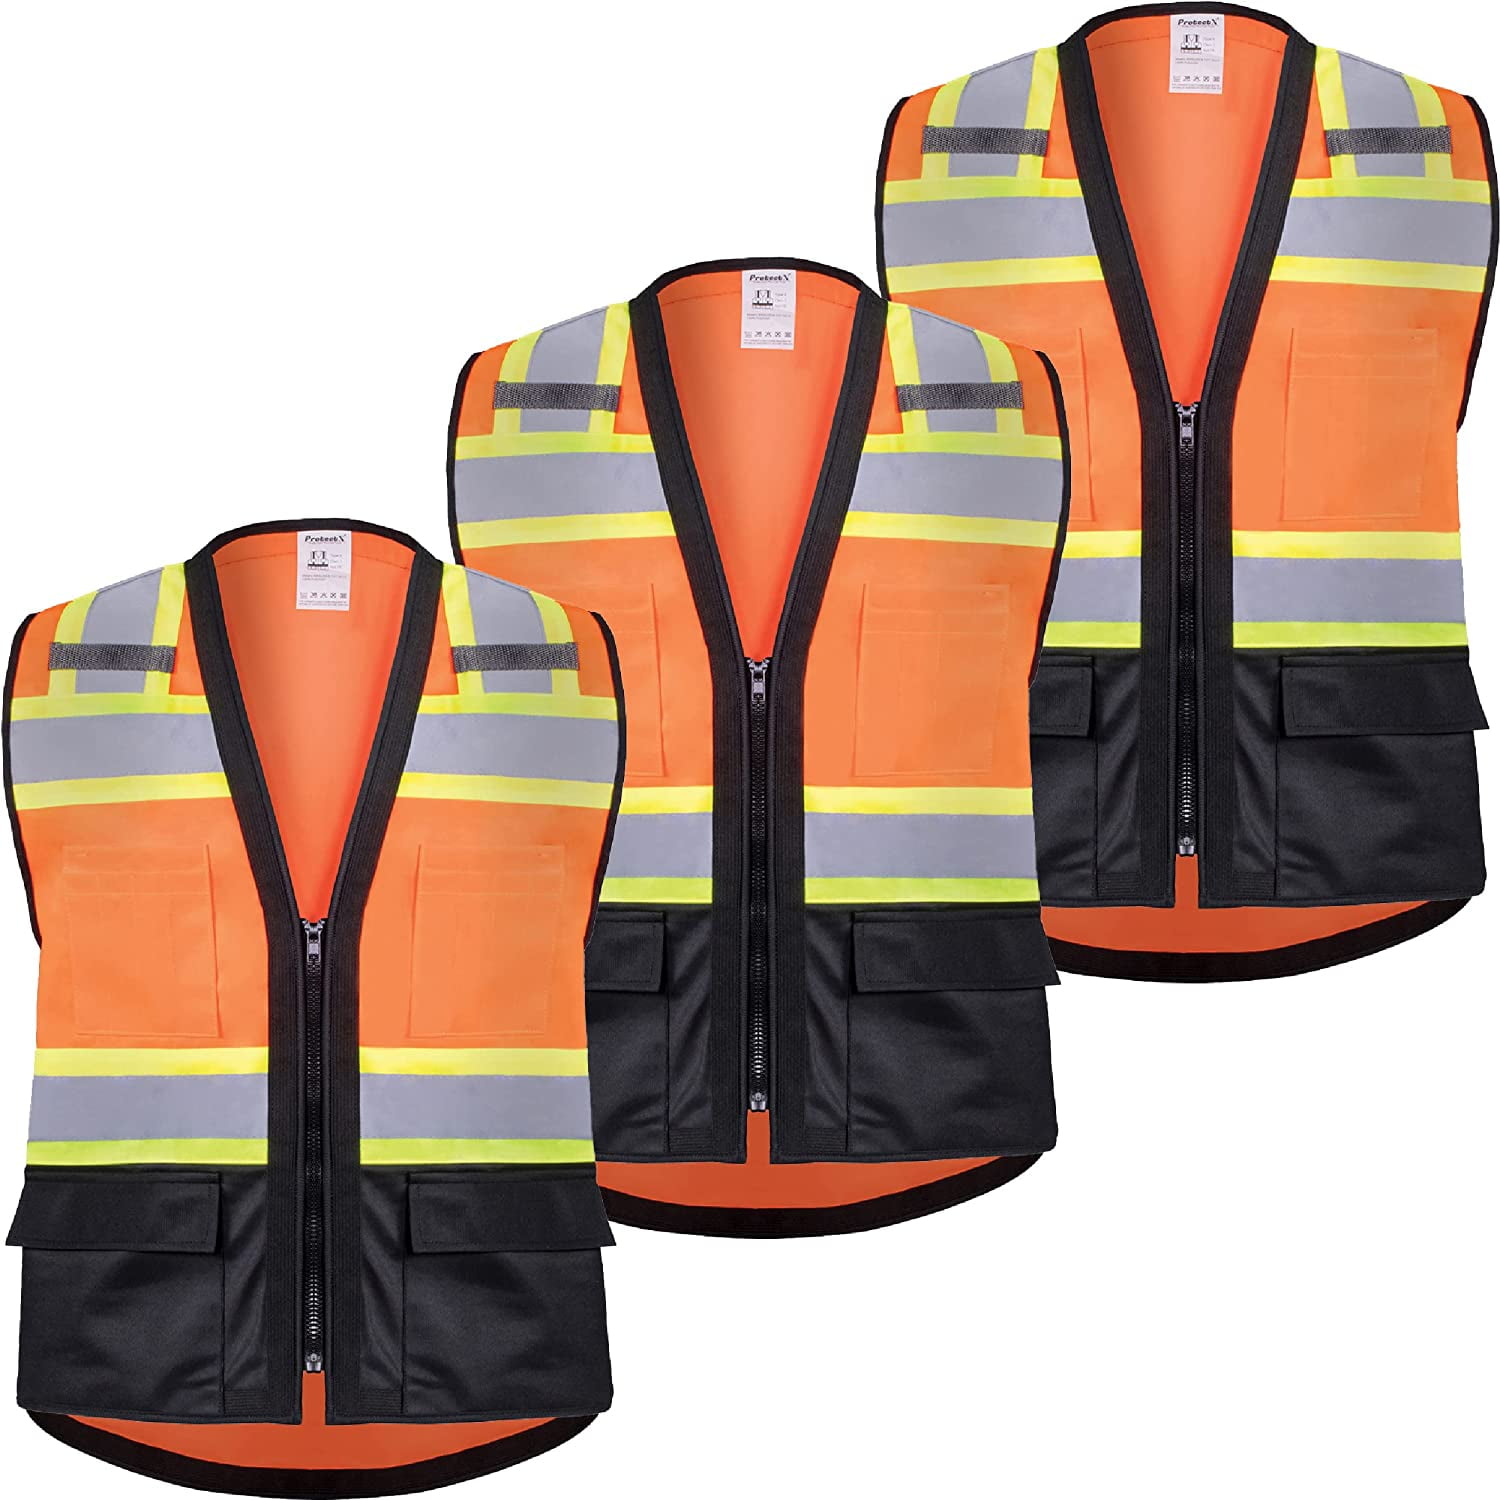 ProtectX 6 Pockets High Visibility Zipper Front Safety Vest with